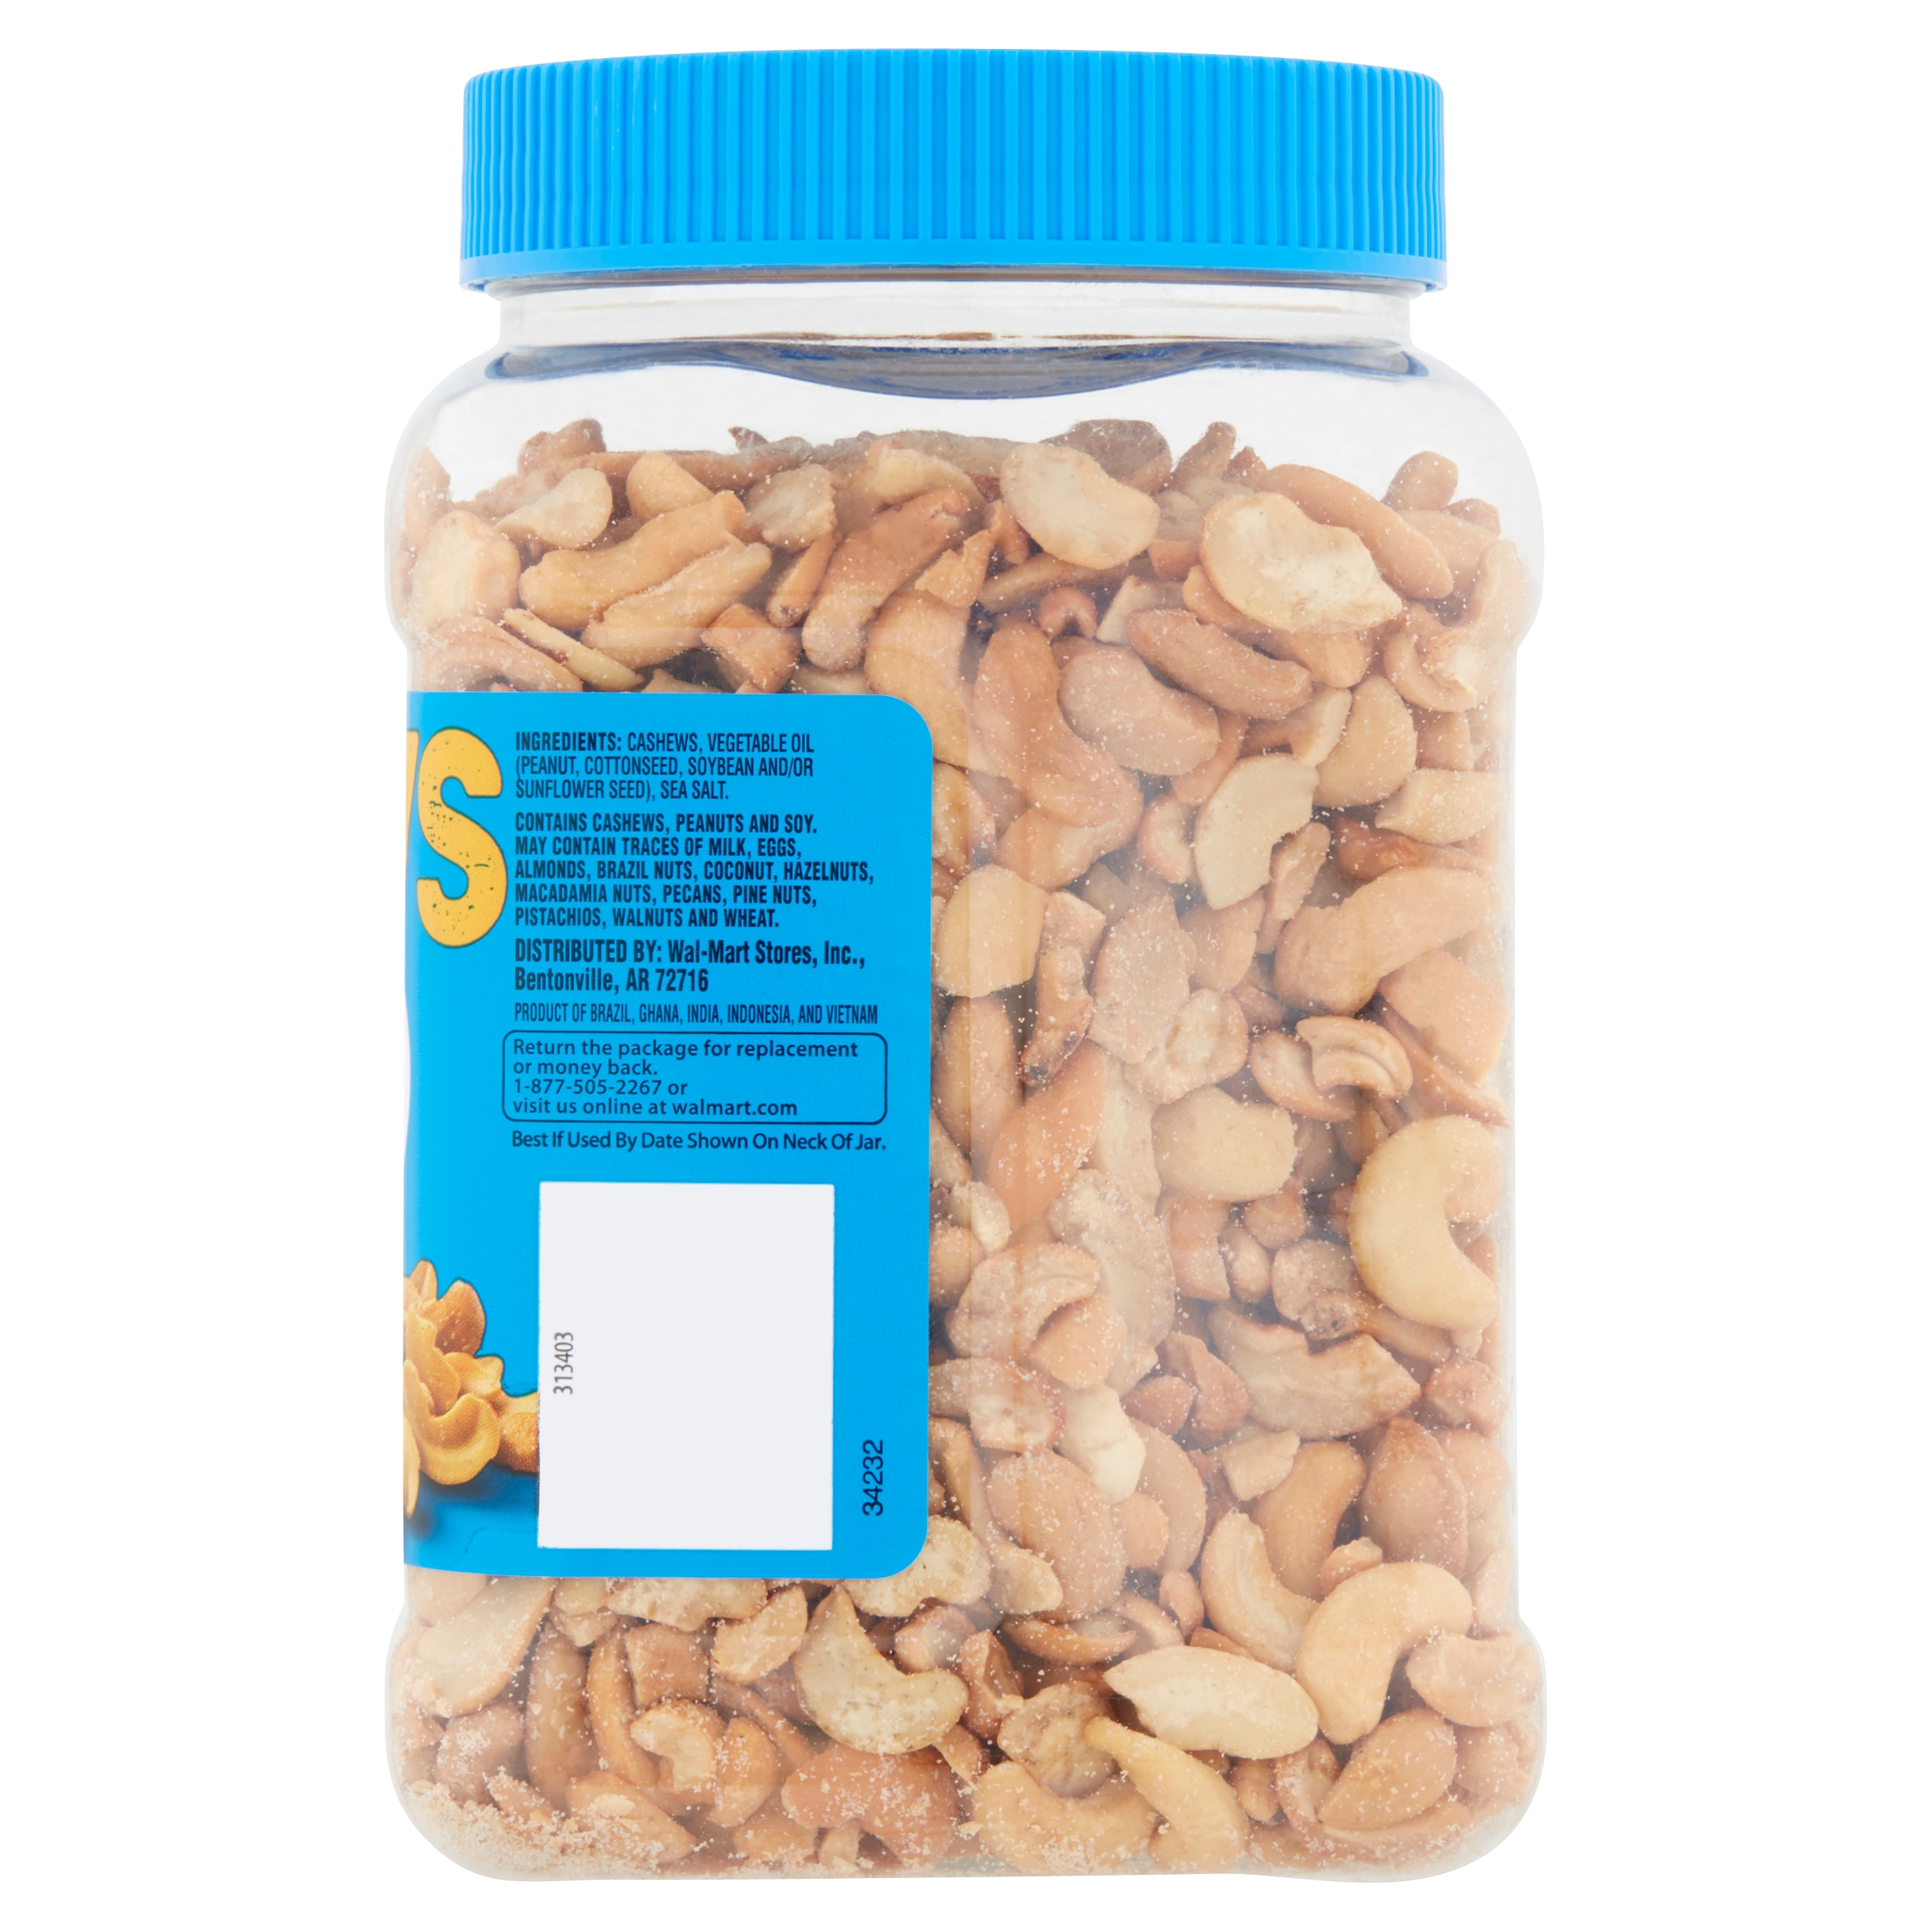 Great Value Roasted & Salted Cashew Halves & Pieces, 24 oz - image 4 of 9